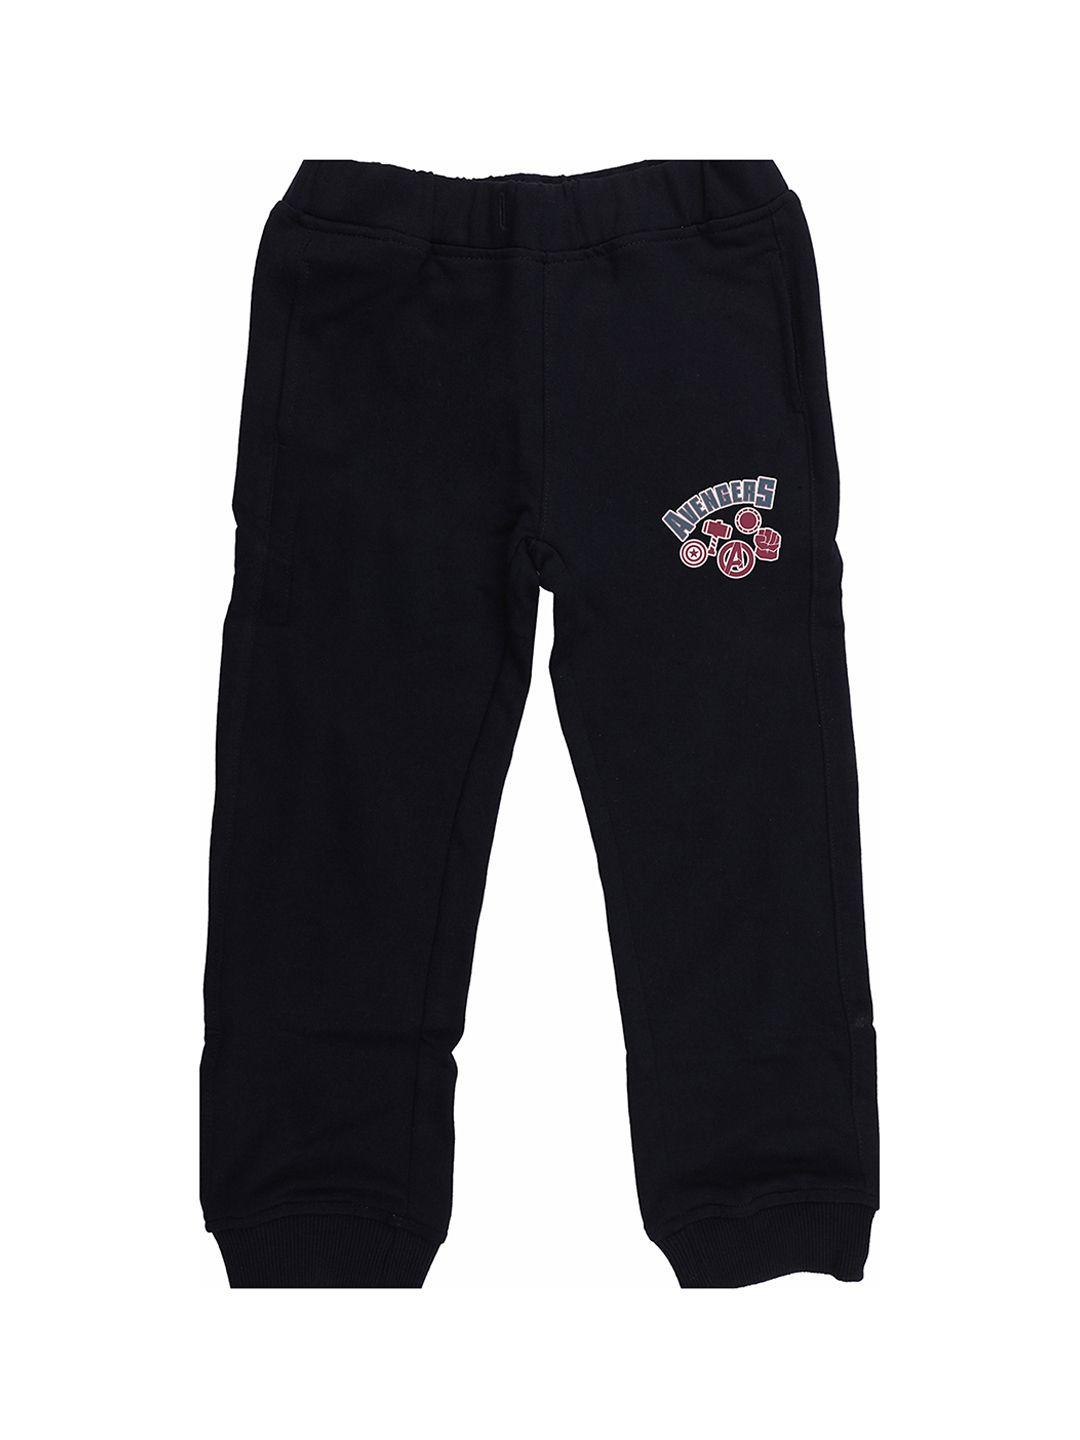 marvel by wear your mind kids navy blue joggers